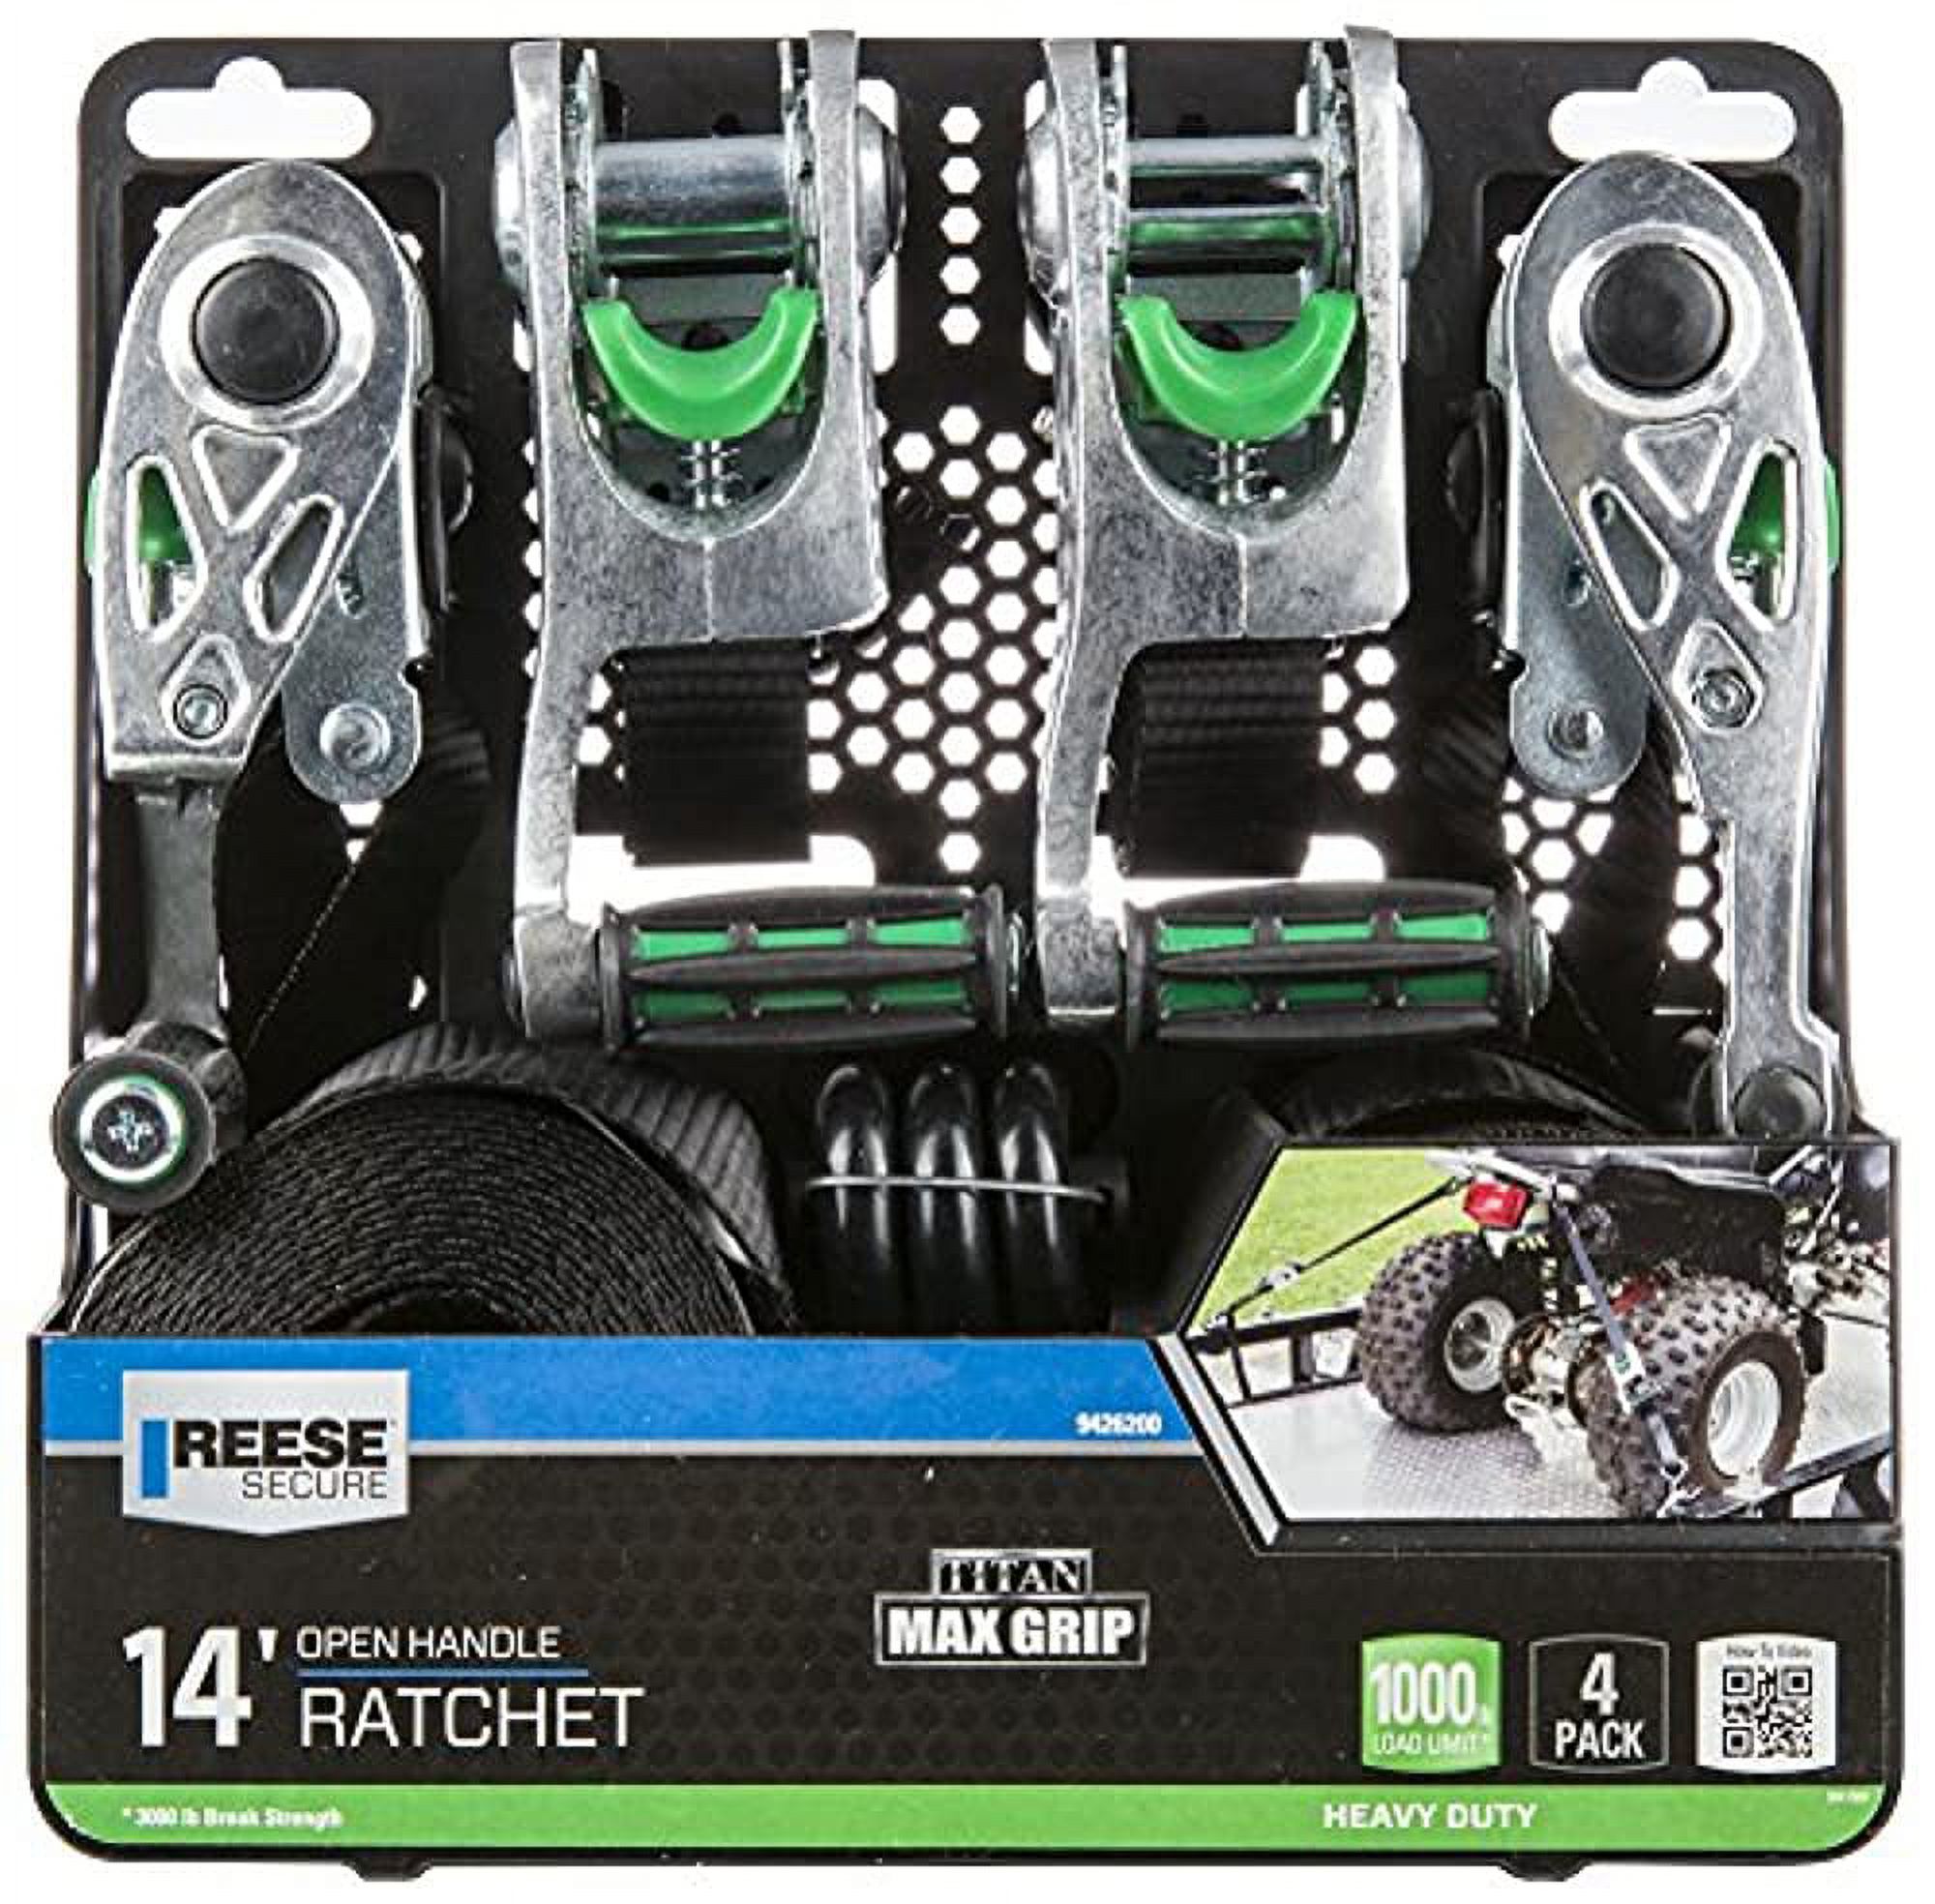 Reese Carry Power Titan Ratchet, 4-Pack - image 3 of 4